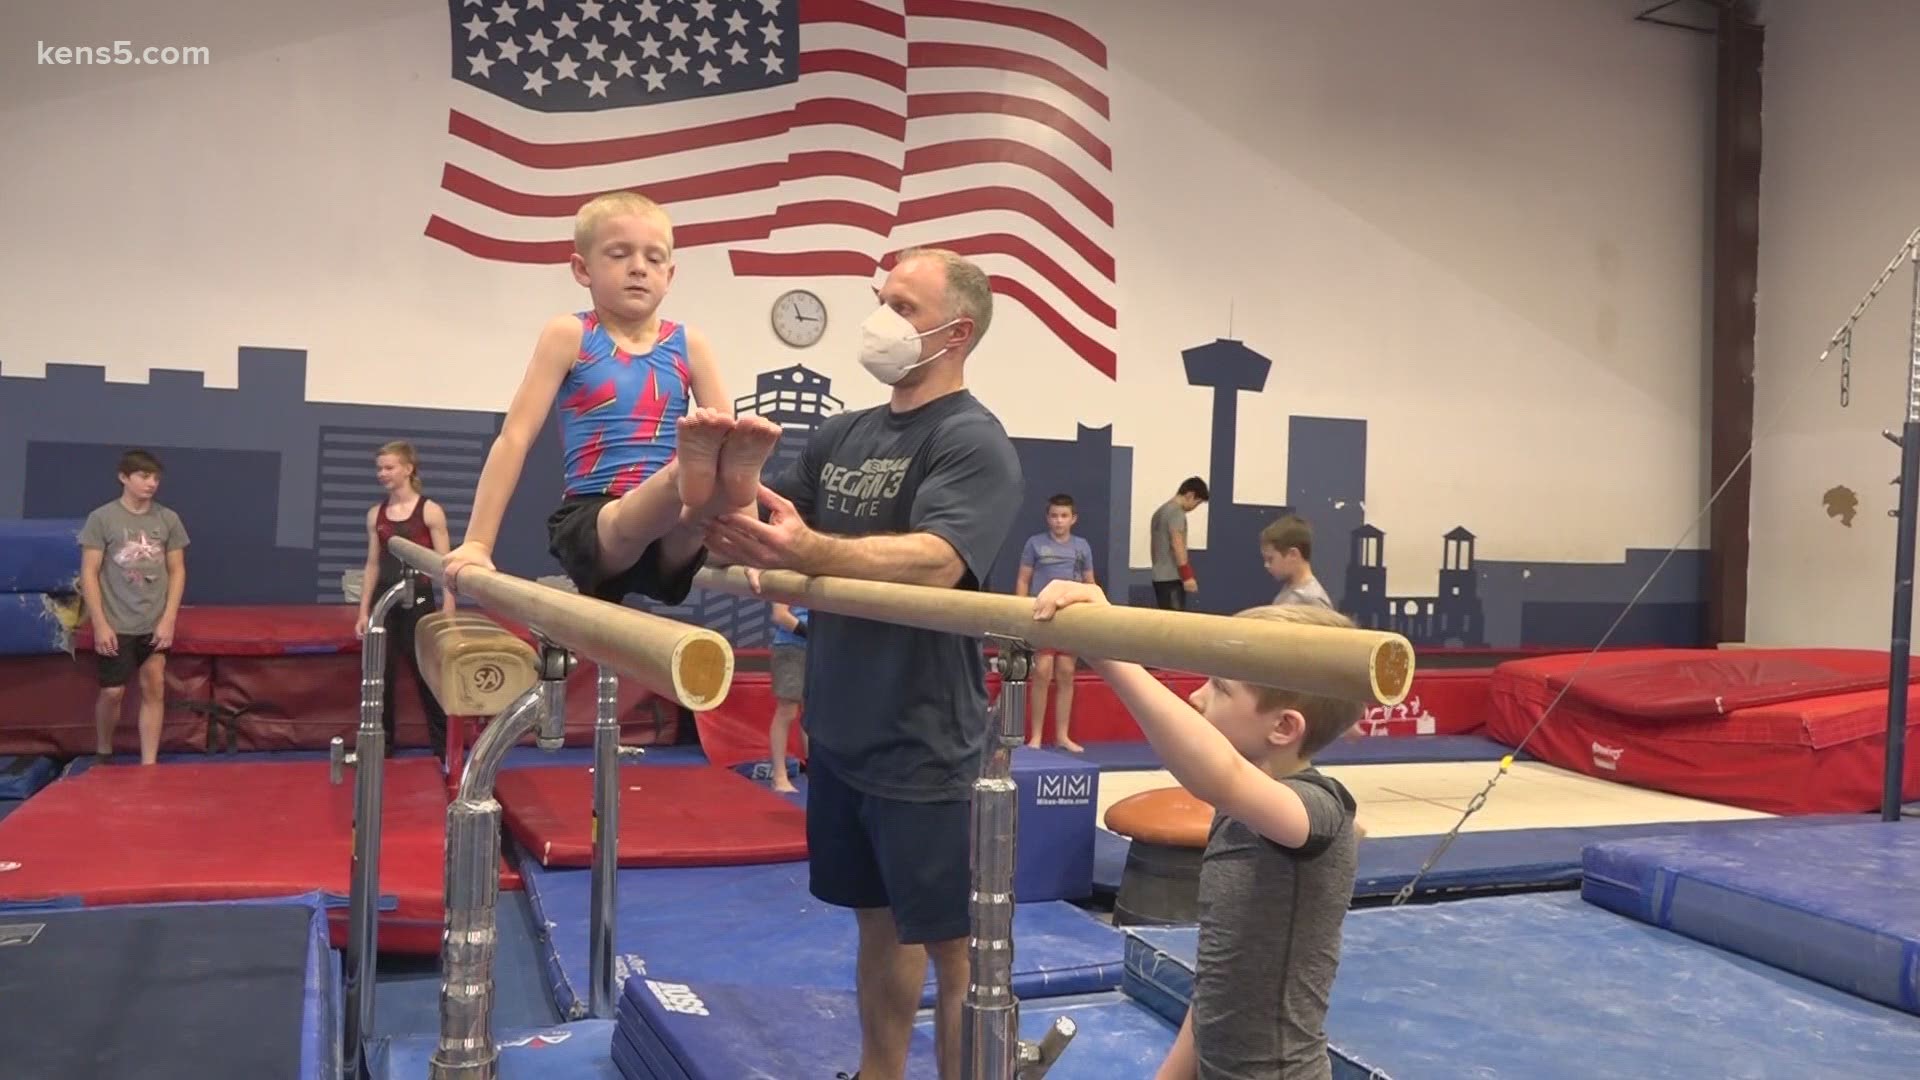 "They get to rub elbows and hold medals, they get to ask questions and say hey how did you do this," said Bruce Kowal of San Antonio Gymnastics Academy.